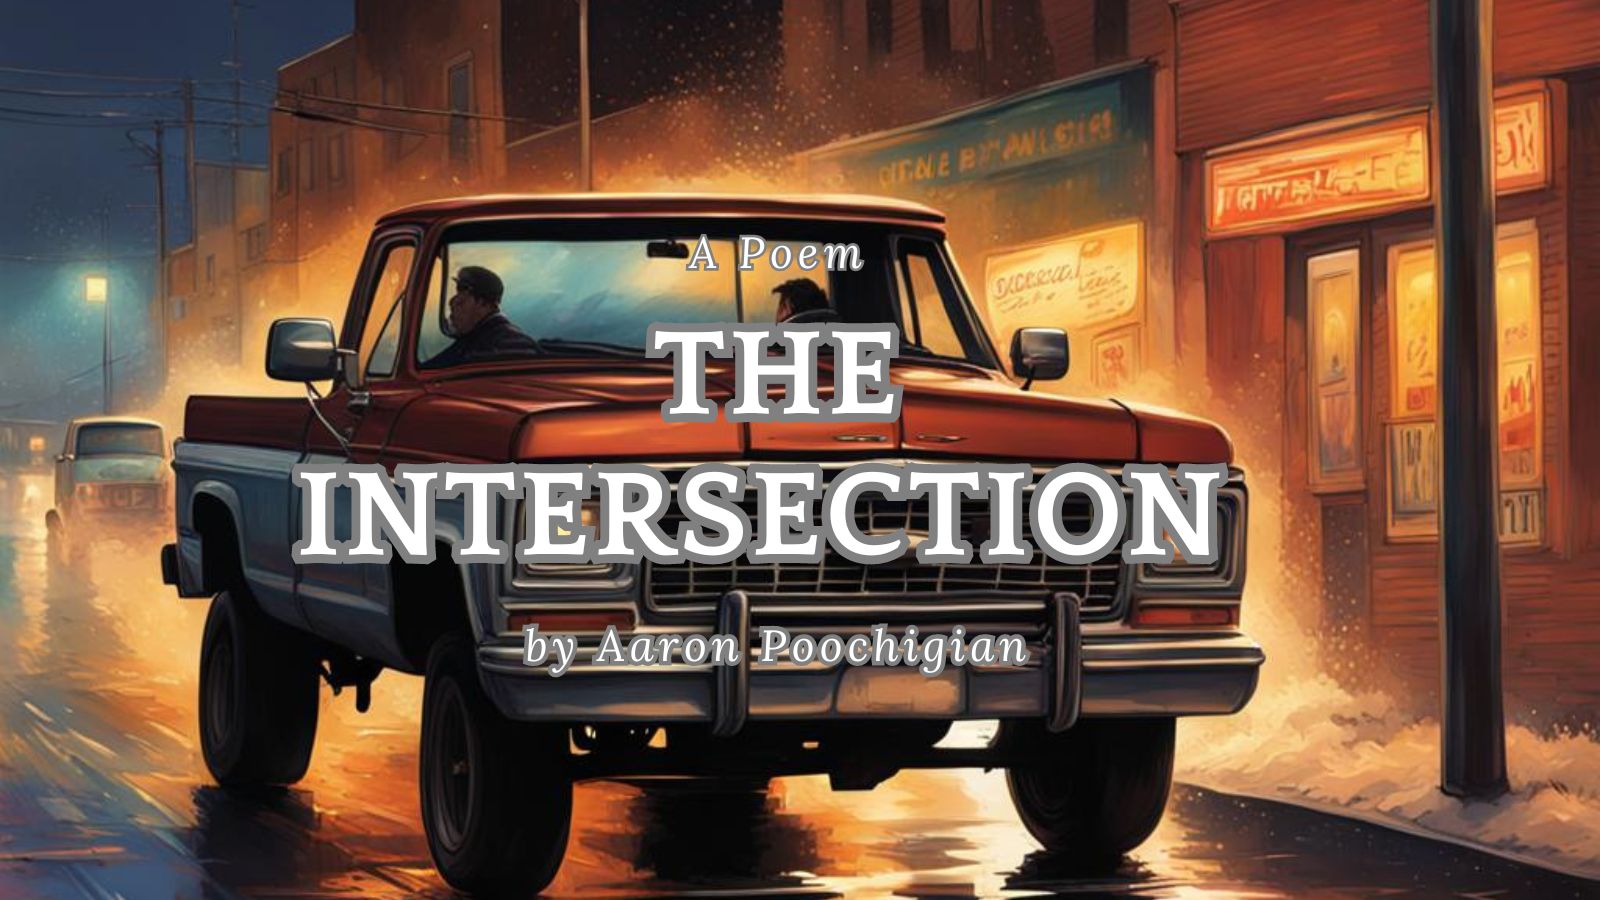 The Intersection by Aaron Poochigian